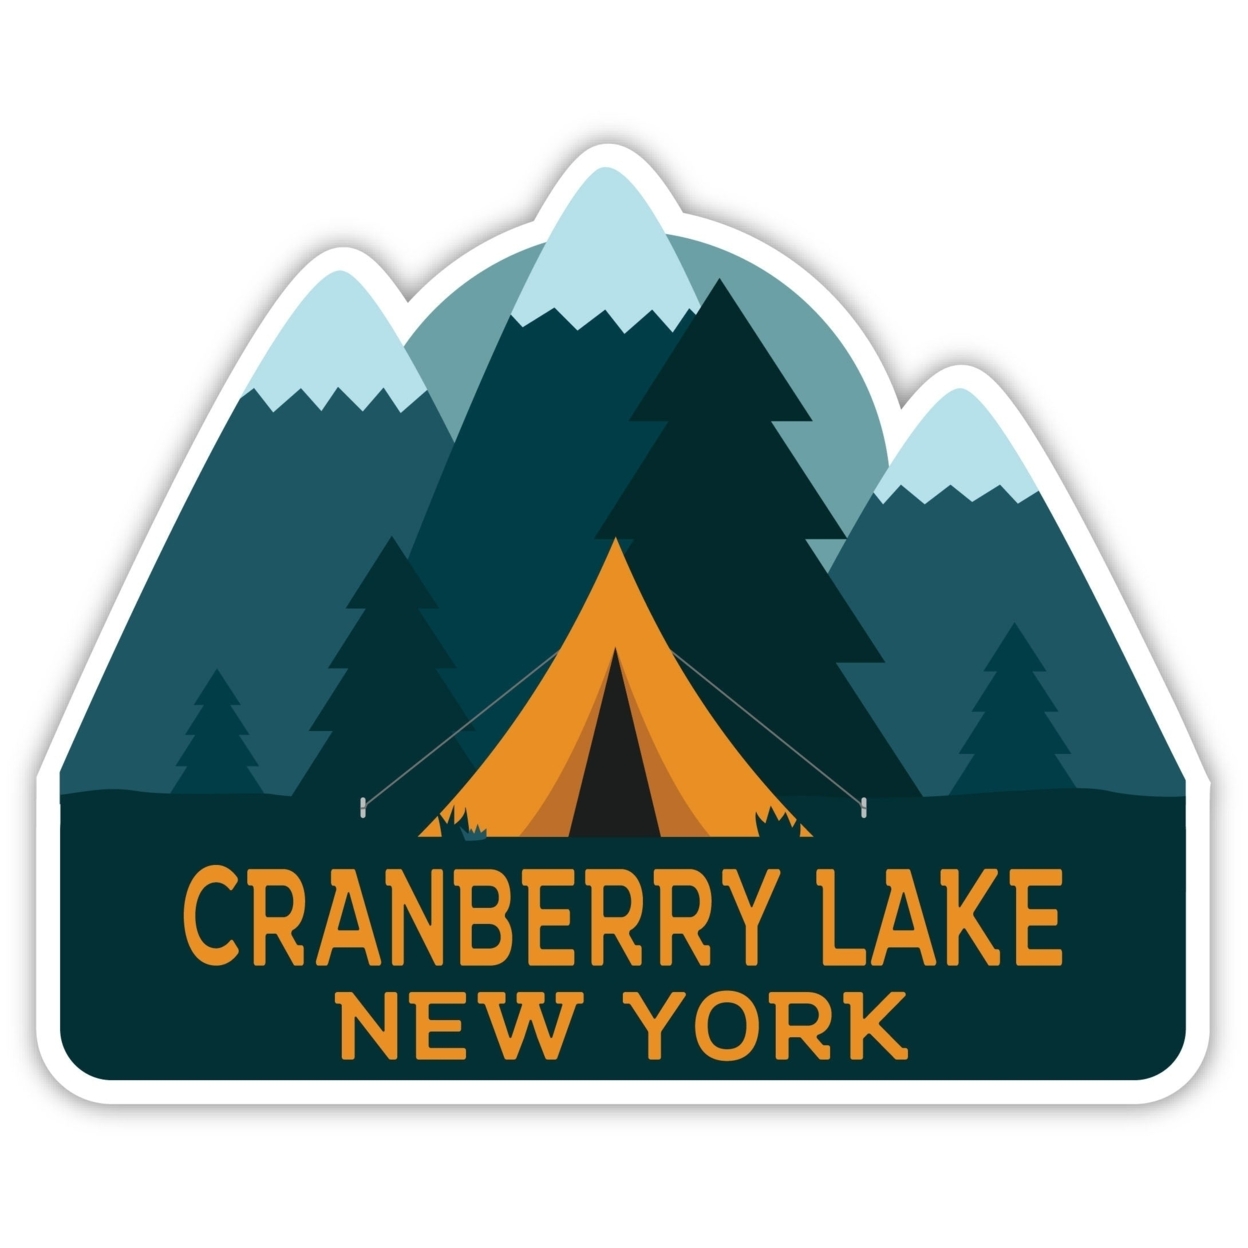 Cranberry Lake New York Souvenir Decorative Stickers (Choose Theme And Size) - 4-Pack, 6-Inch, Tent